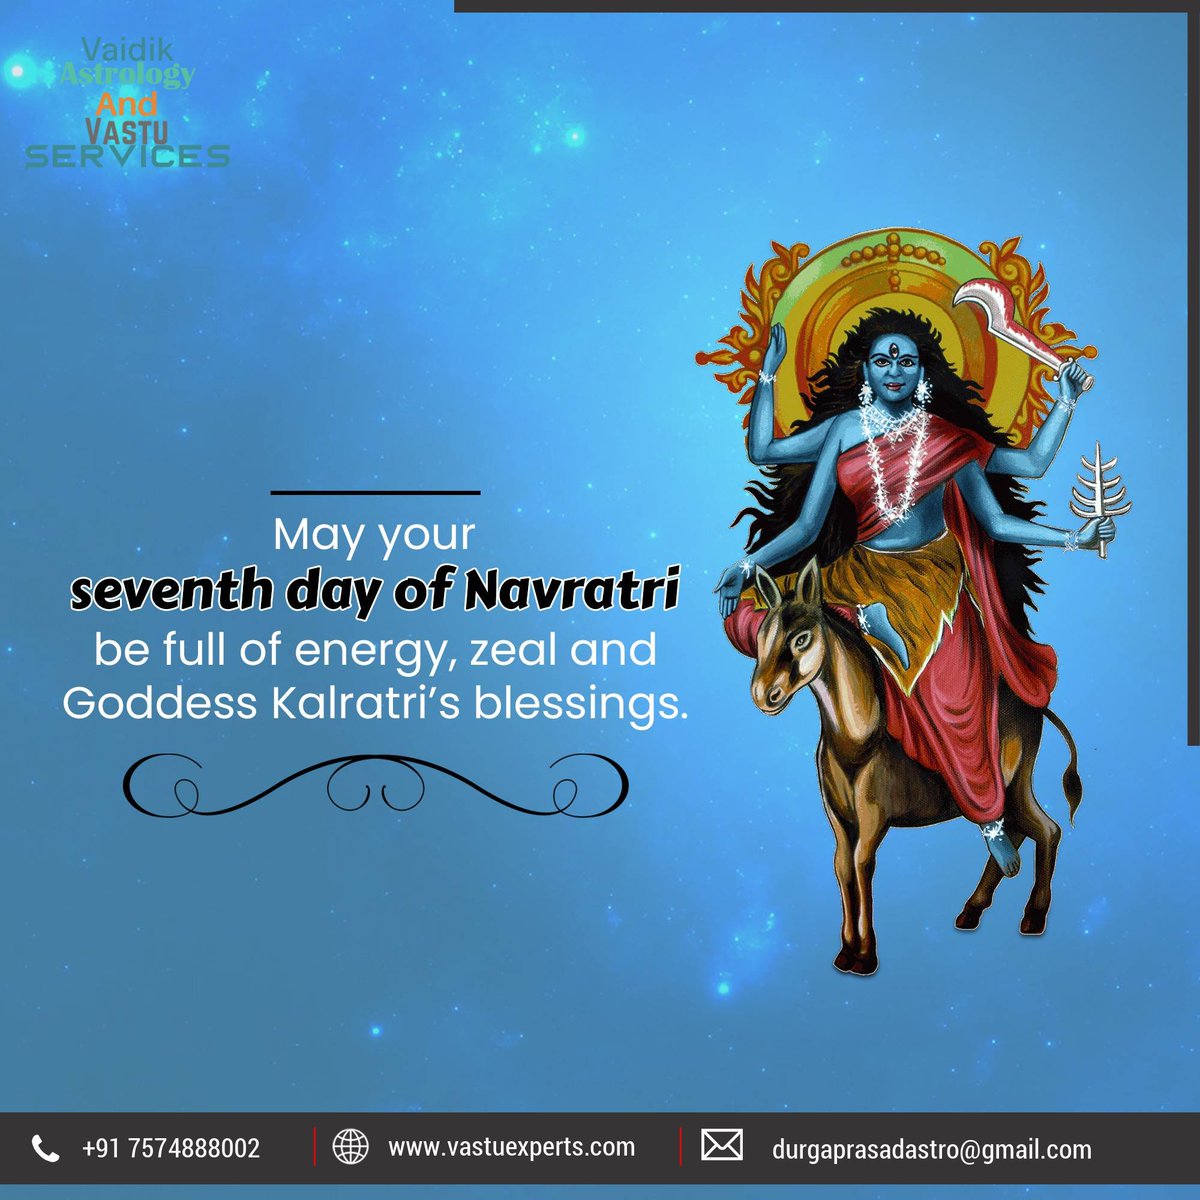 May your seventh day of Navratri be full of energy, zeal and godess kalratri's  blessings

#Kalratri #kalratrimata #kaalratrimaa #navratri2021 #navratri #navratrispecial #navratri2k21 #acharyadurgaprasadshastri #navratri7thday #navratriday7 #NavratriVibes